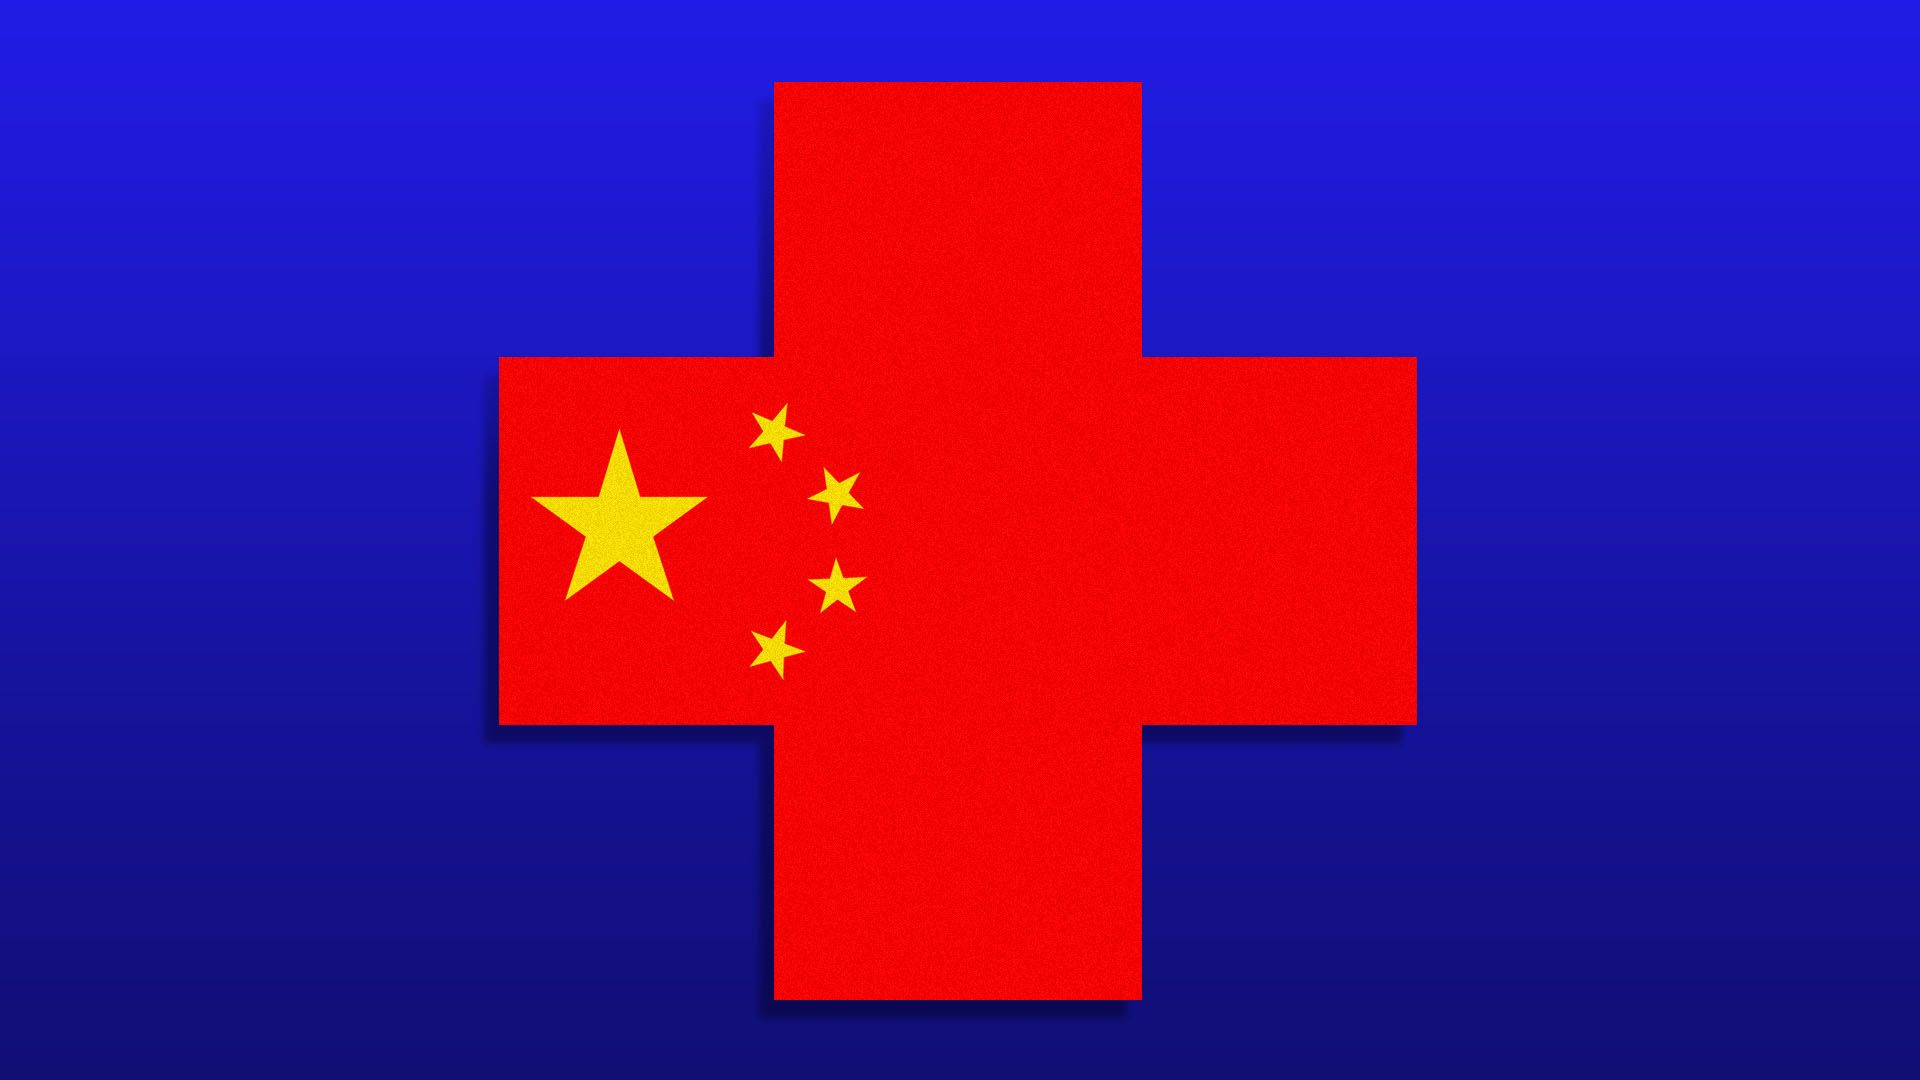 Illustration of the red cross as a Chinese flag